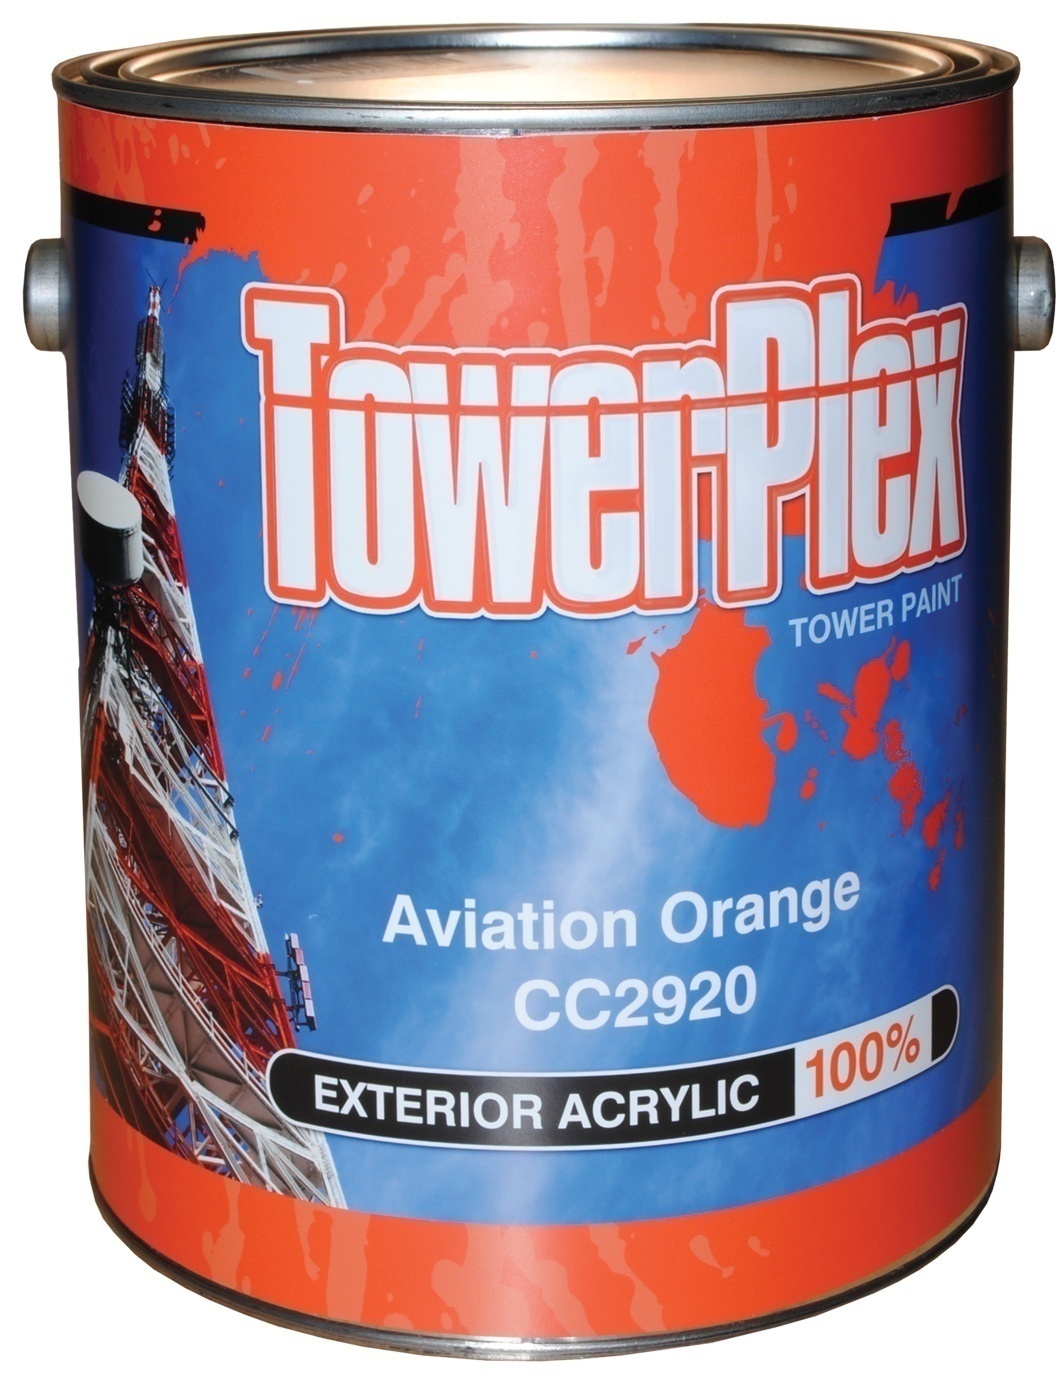 CC2920 TowerPlex Aviation Orange Tower Paint (1 Gallon Pail) from GME Supply